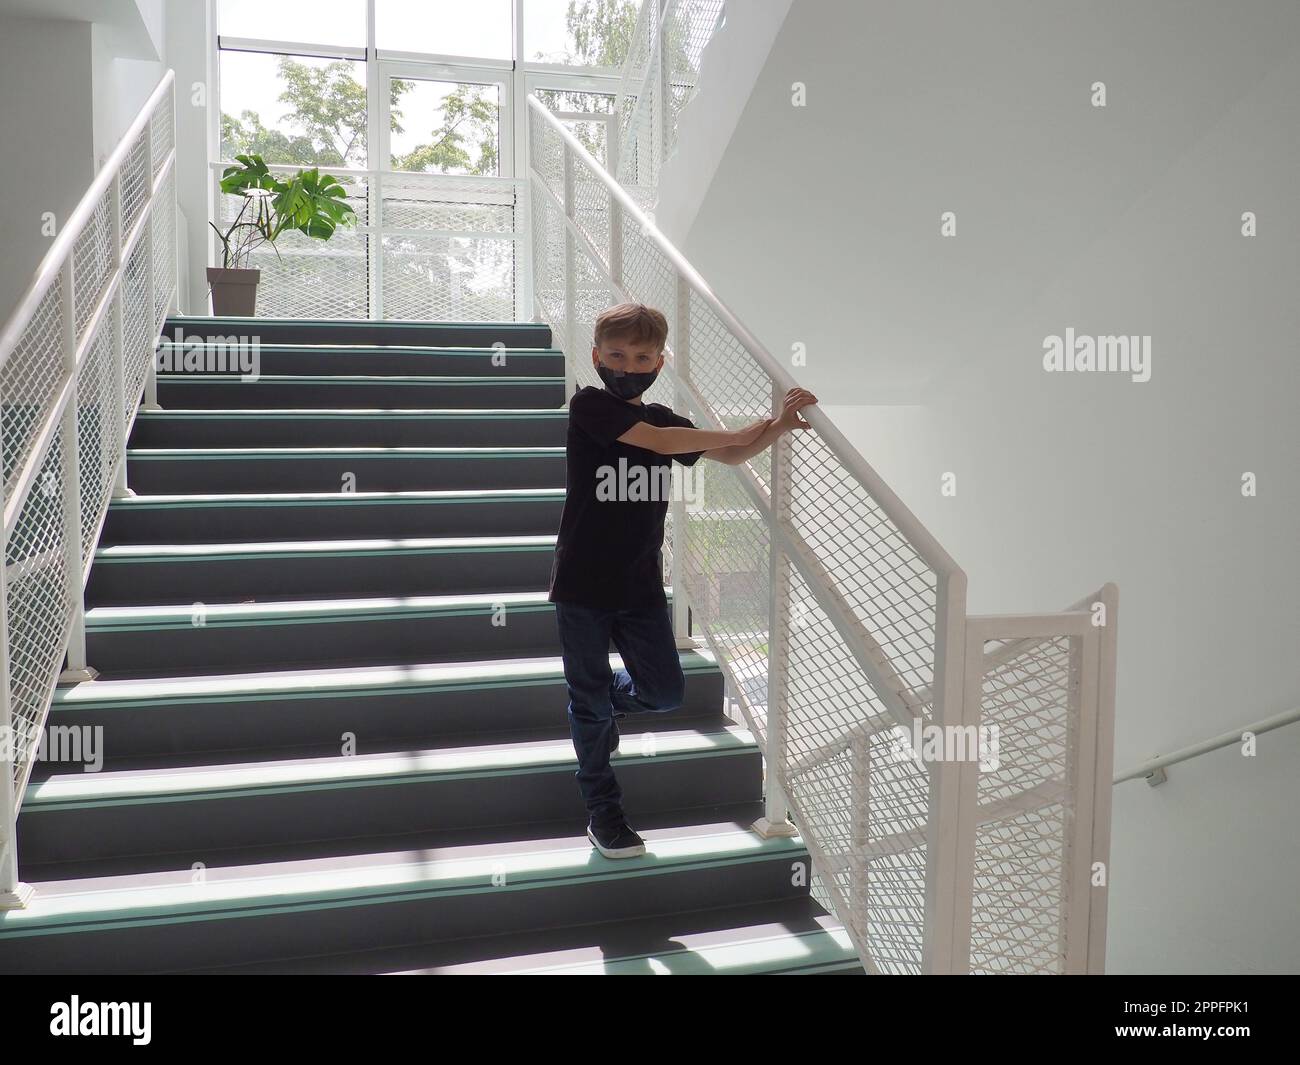 A blond boy 8 years old in black clothes and a mask stands on a white school ladder. The child looks at the camera and holds the handrail with his hand. School concept. Internal interior. Stock Photo